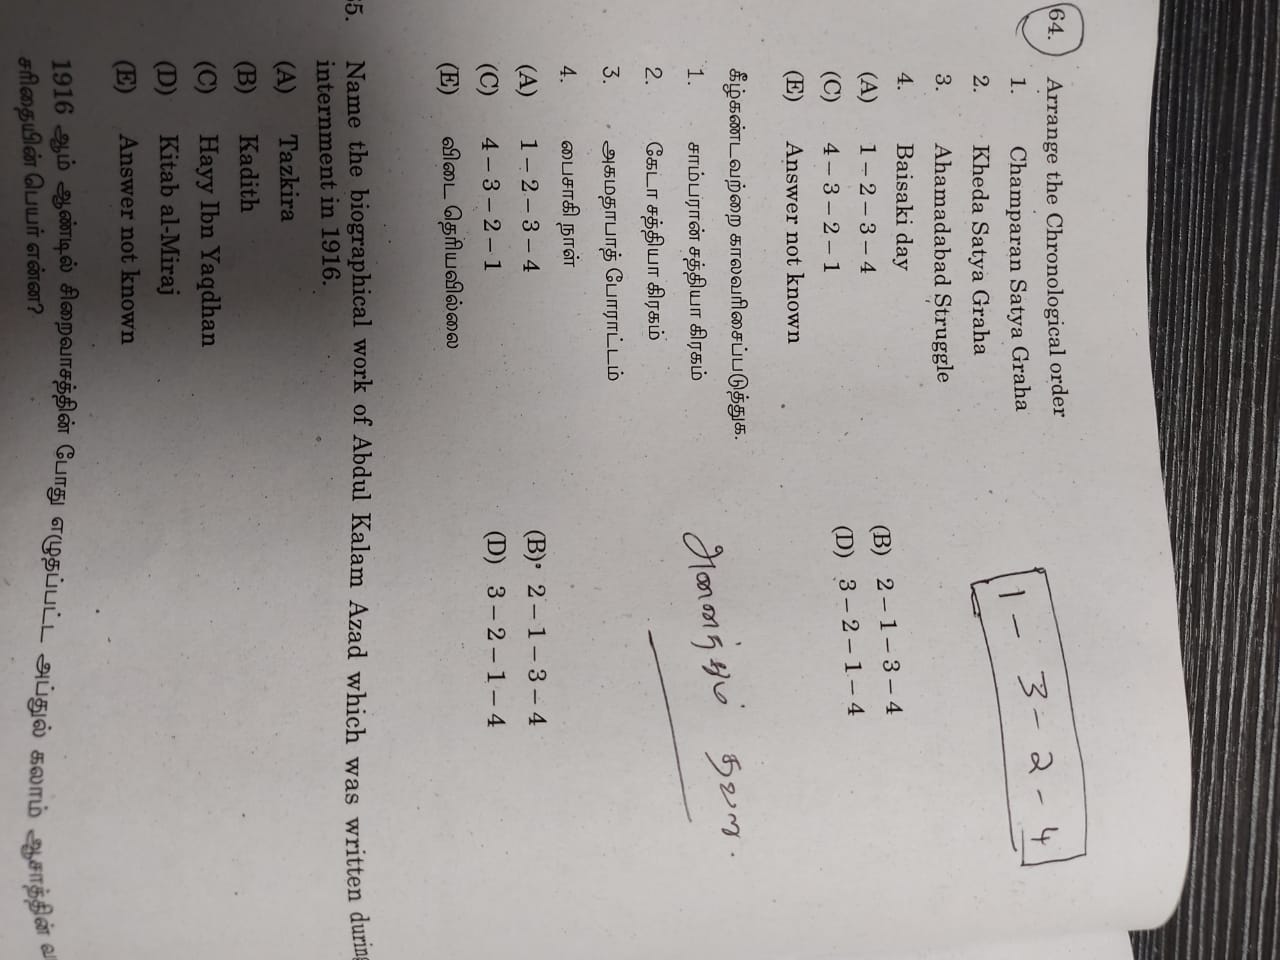 6 questions incorrectly featured in Group-1 exam